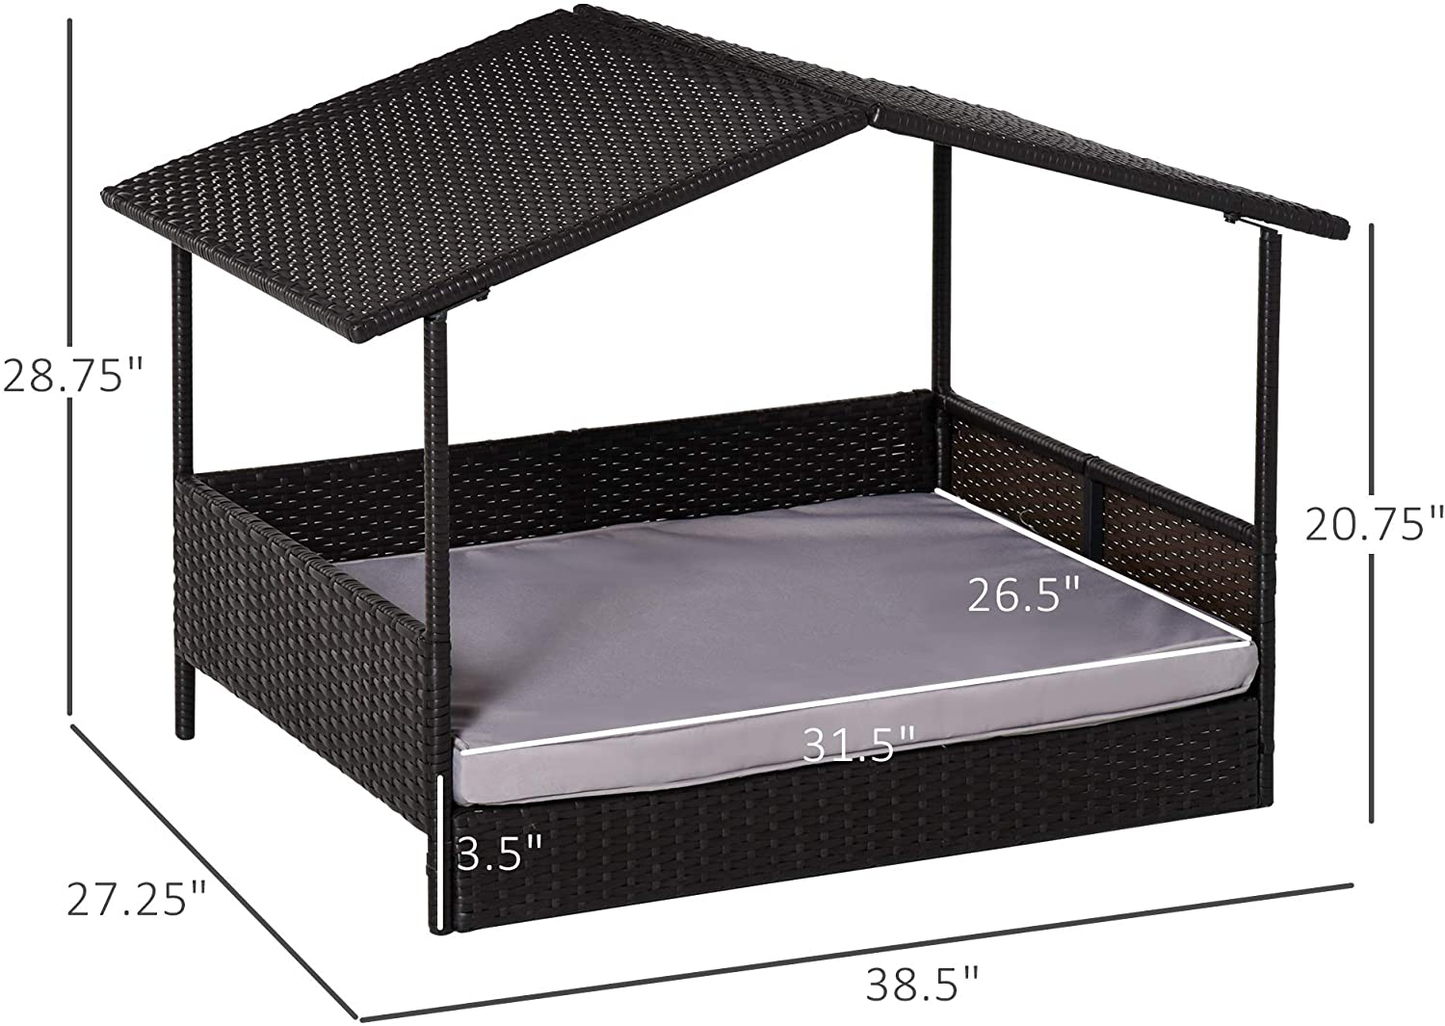 Pawhut Wicker Dog House Raised Rattan Bed for Indoor/Outdoor with Cushion Lounge Animals & Pet Supplies > Pet Supplies > Dog Supplies > Dog Houses PawHut   